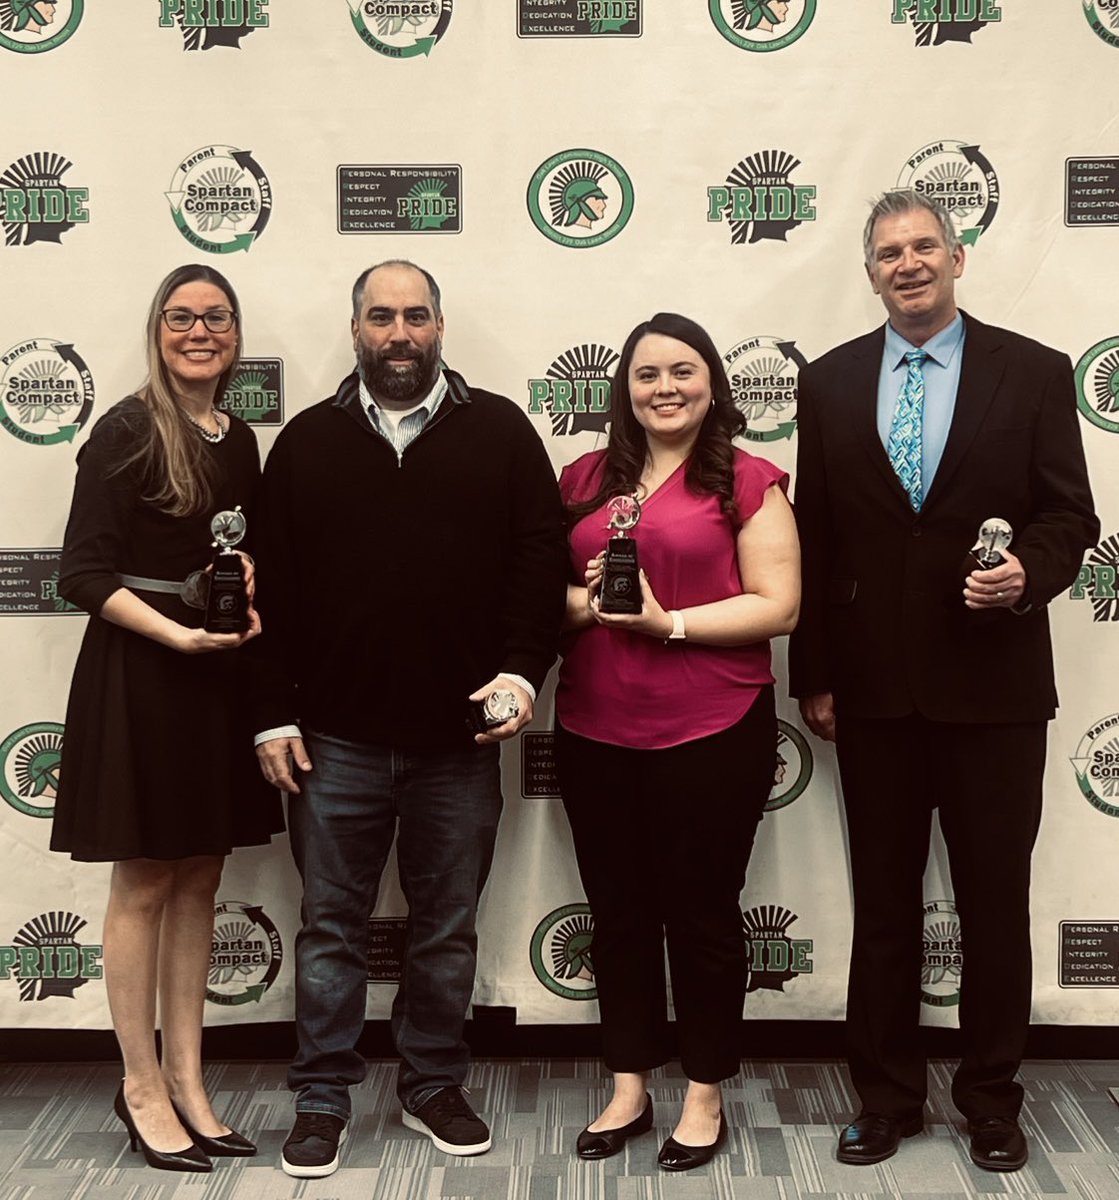 Initiative, Innovation and Service are where these individuals excel. Thank you for your exceptional dedication to the Oak Lawn Community. Congratulations on being recognized as our inaugeral Spartan Excellence Award recipients. #olchspride